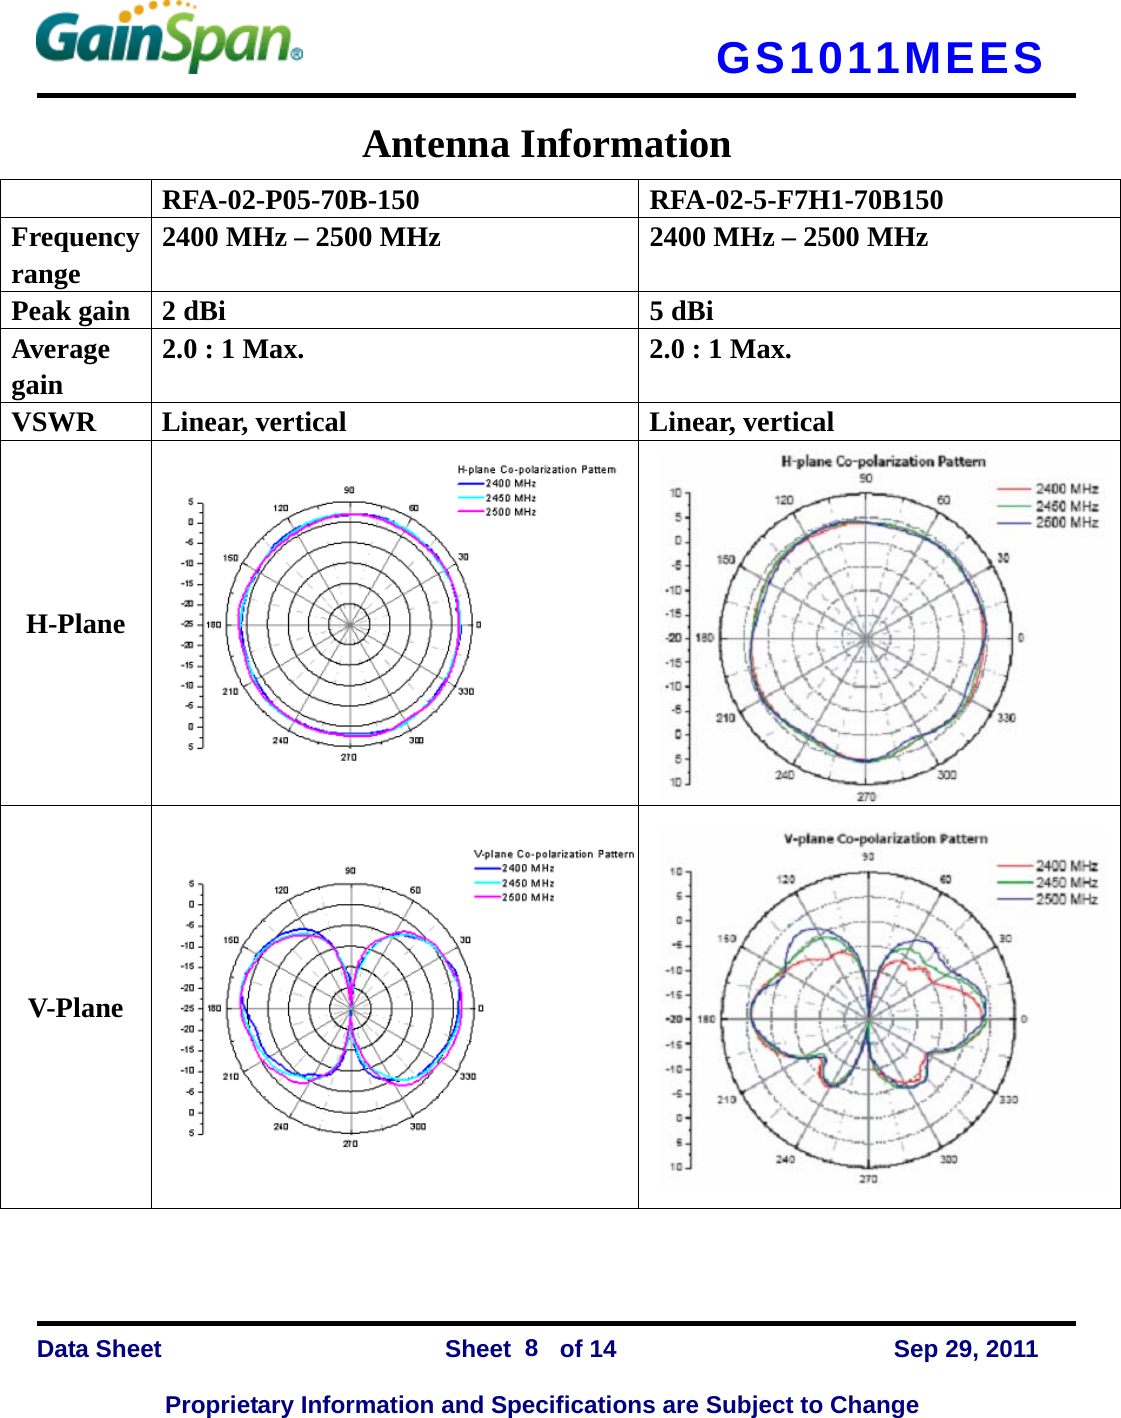   GS1011MEES    Data Sheet                Sheet    of 14      Sep 29, 2011  Proprietary Information and Specifications are Subject to Change 8 Antenna Information  RFA-02-P05-70B-150  RFA-02-5-F7H1-70B150 Frequency range    2400 MHz – 2500 MHz  2400 MHz – 2500 MHz Peak gain  2 dBi  5 dBi Average gain  2.0 : 1 Max.  2.0 : 1 Max. VSWR Linear, vertical  Linear, vertical H-Plane V-Plane 